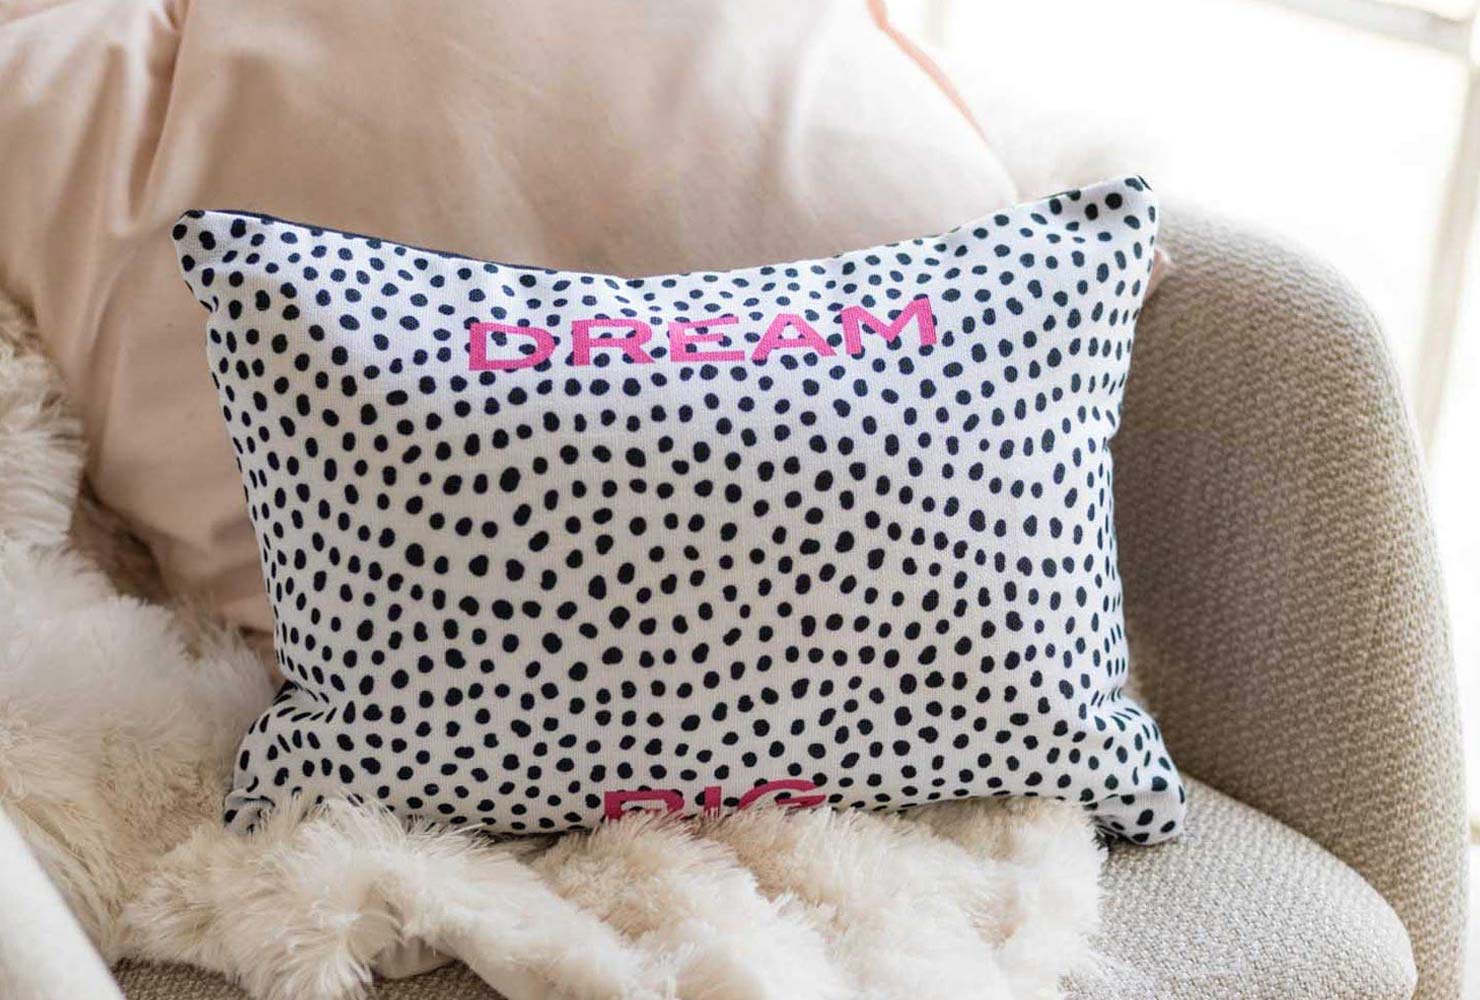 Black and white dotted pillow.